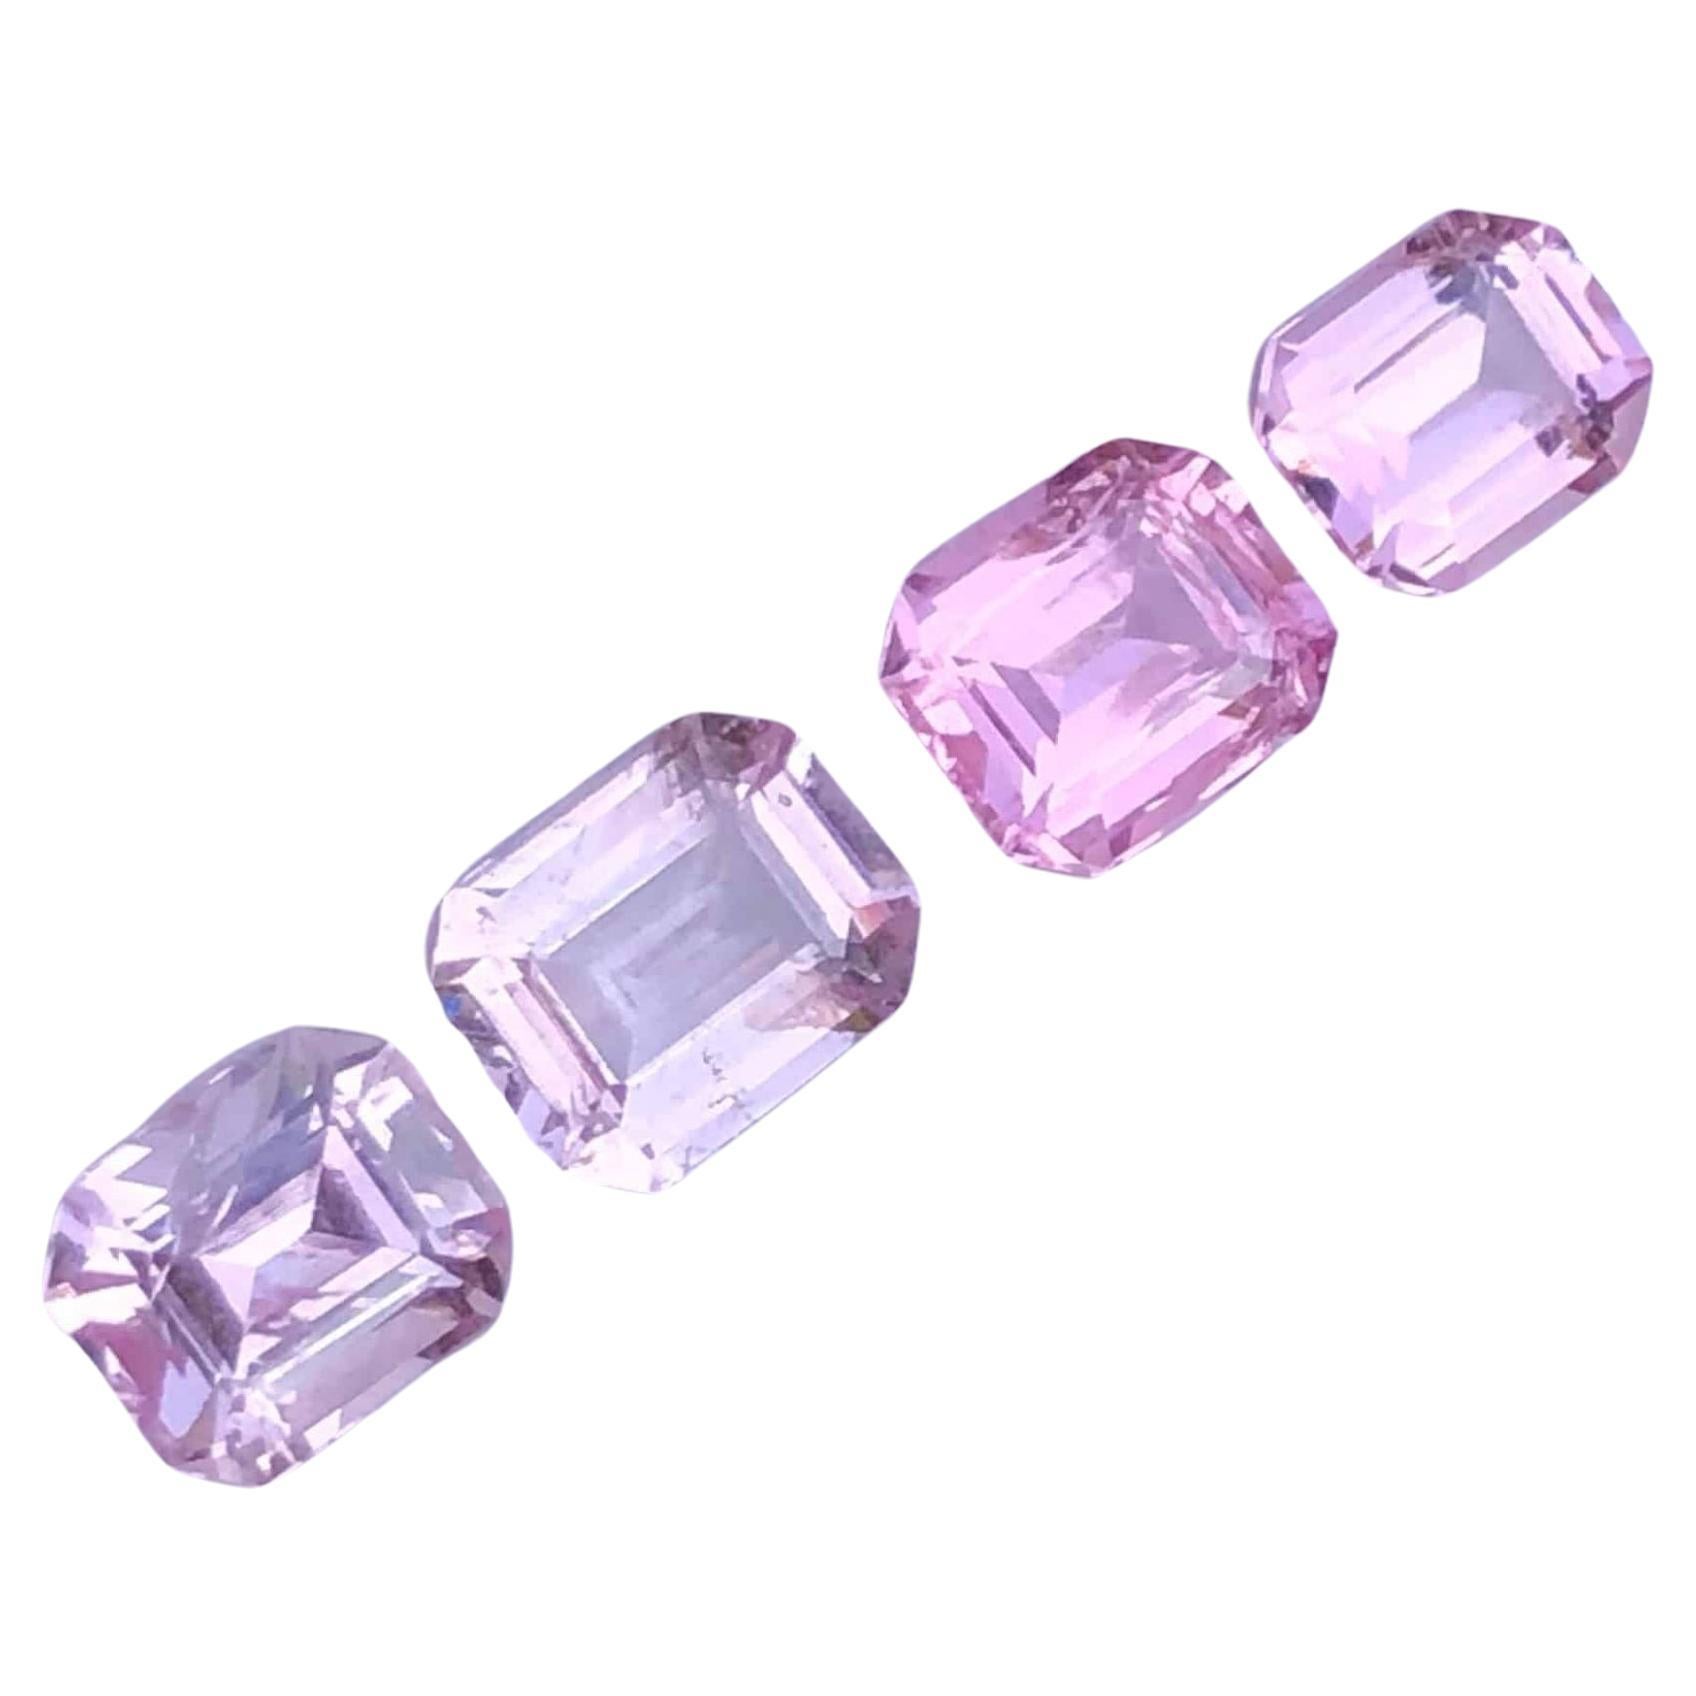 3.05 Carats Natural Pink Spinel For Jewelry Set Loose Gemstones From Tajikistan For Sale